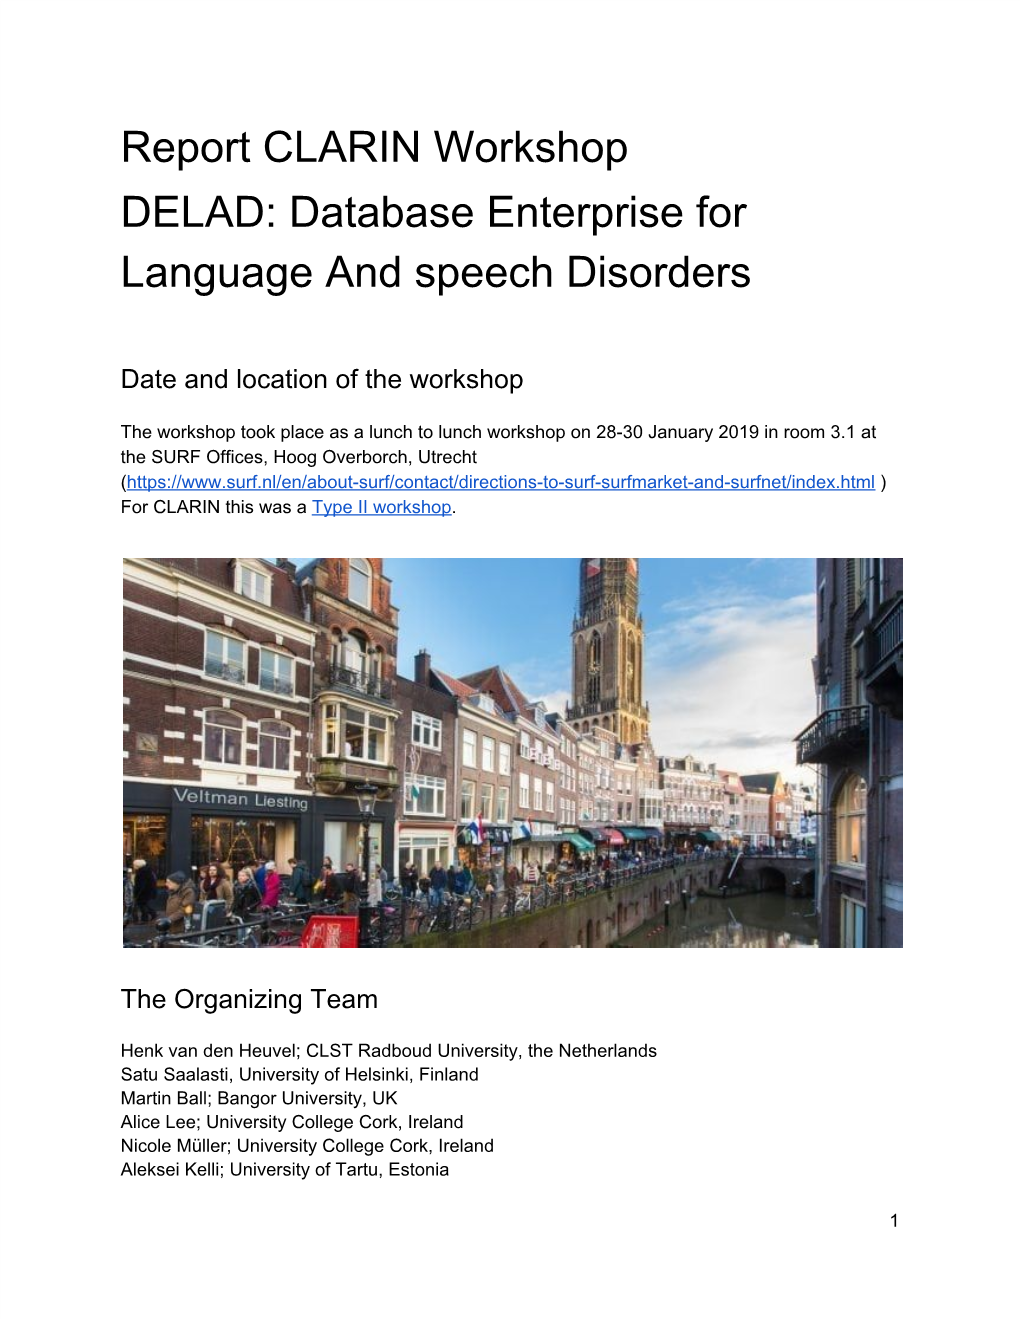 Report CLARIN Workshop DELAD: Database Enterprise for Language and Speech Disorders